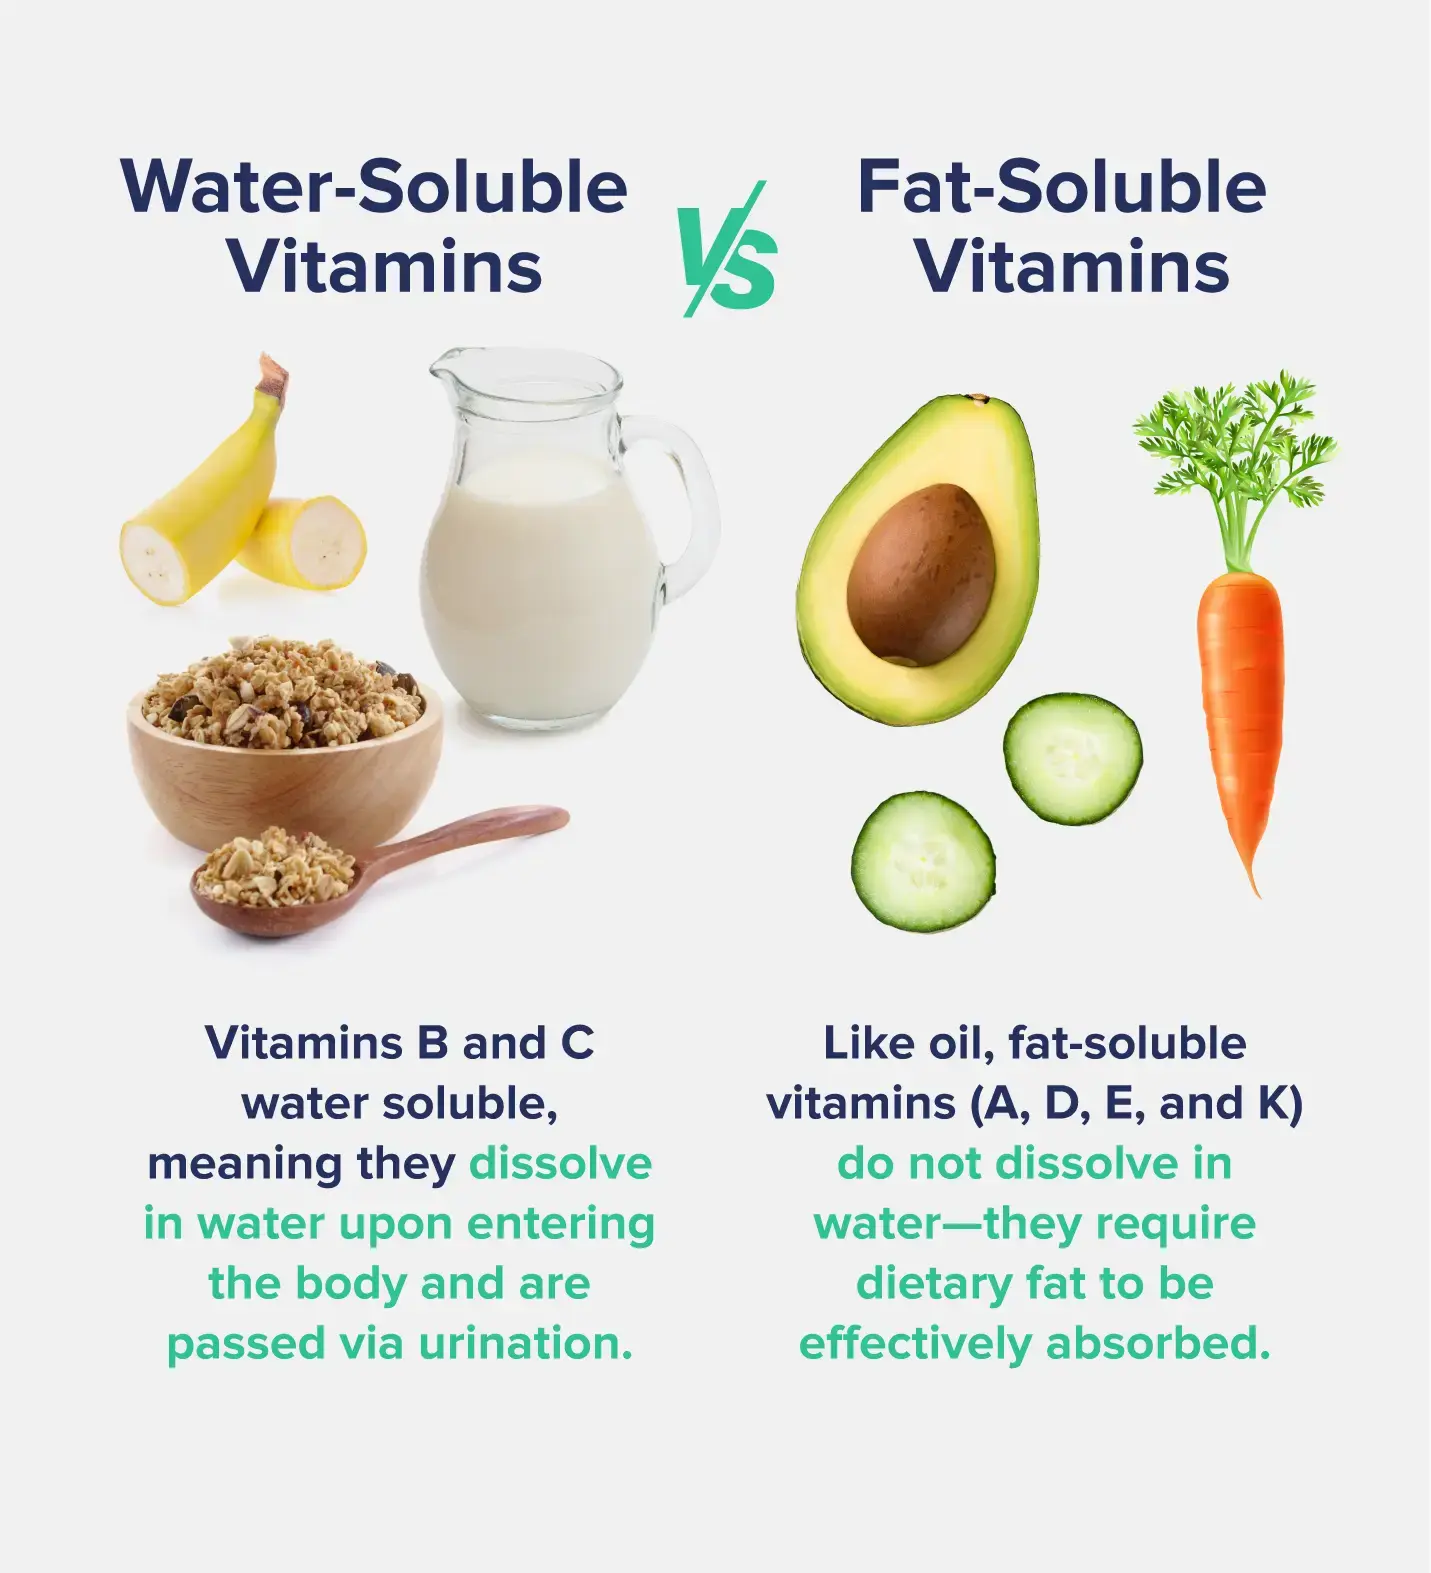 A graphic entitled "Water-Soluble Vitamins VS Fat-Soluble Vitamins" depicting images of each type with labeled descriptions, including bananas and milk for water-soluble vitamins B and C and avocados and cucumbers for fat-soluble vitamins A, D, E, and K. 